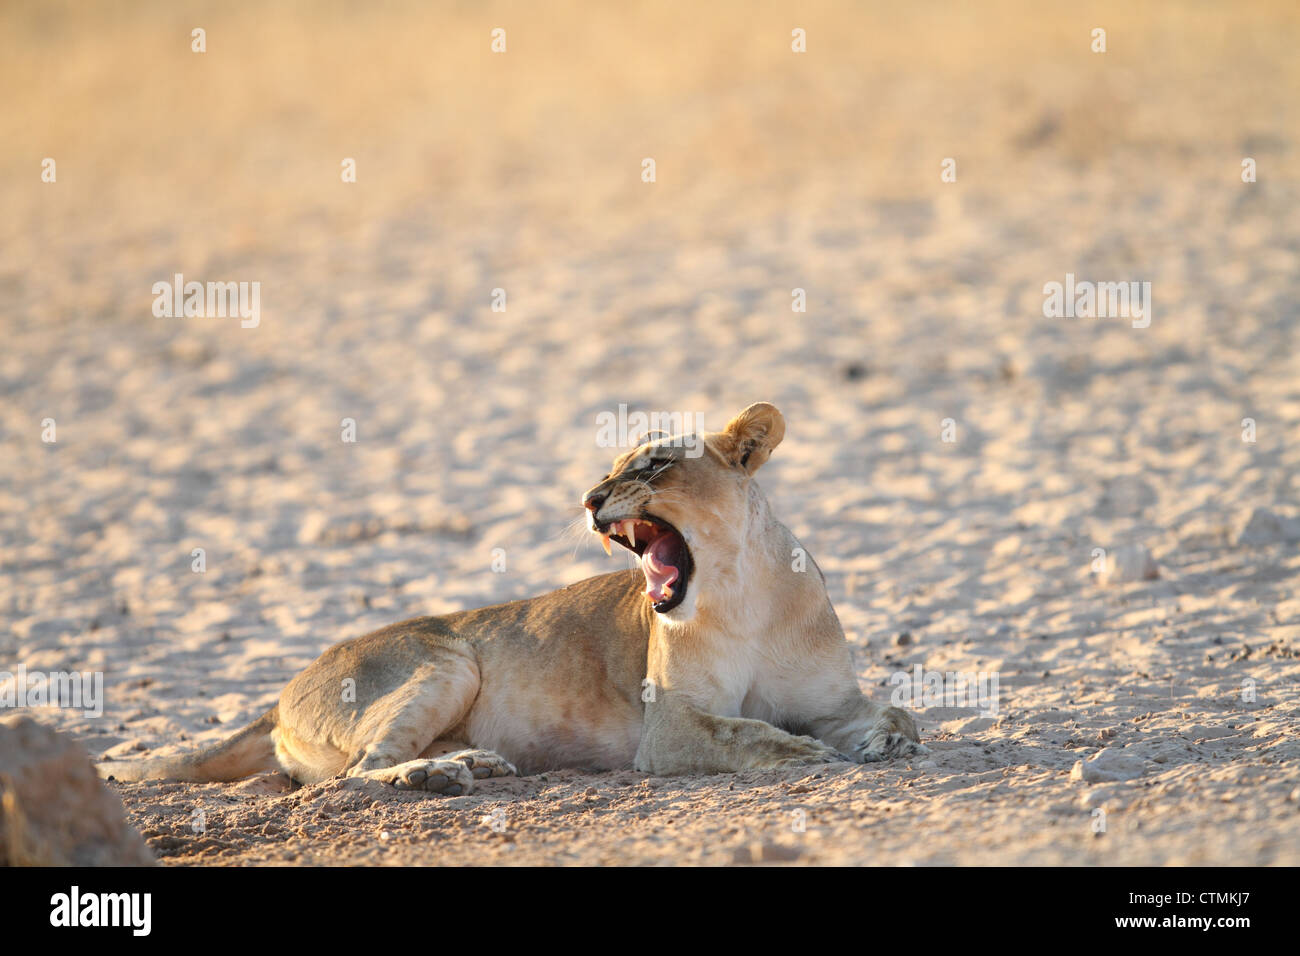 Lioness yawn, road outside Mata mata camp in Kgalagadi Park, South Africa Stock Photo